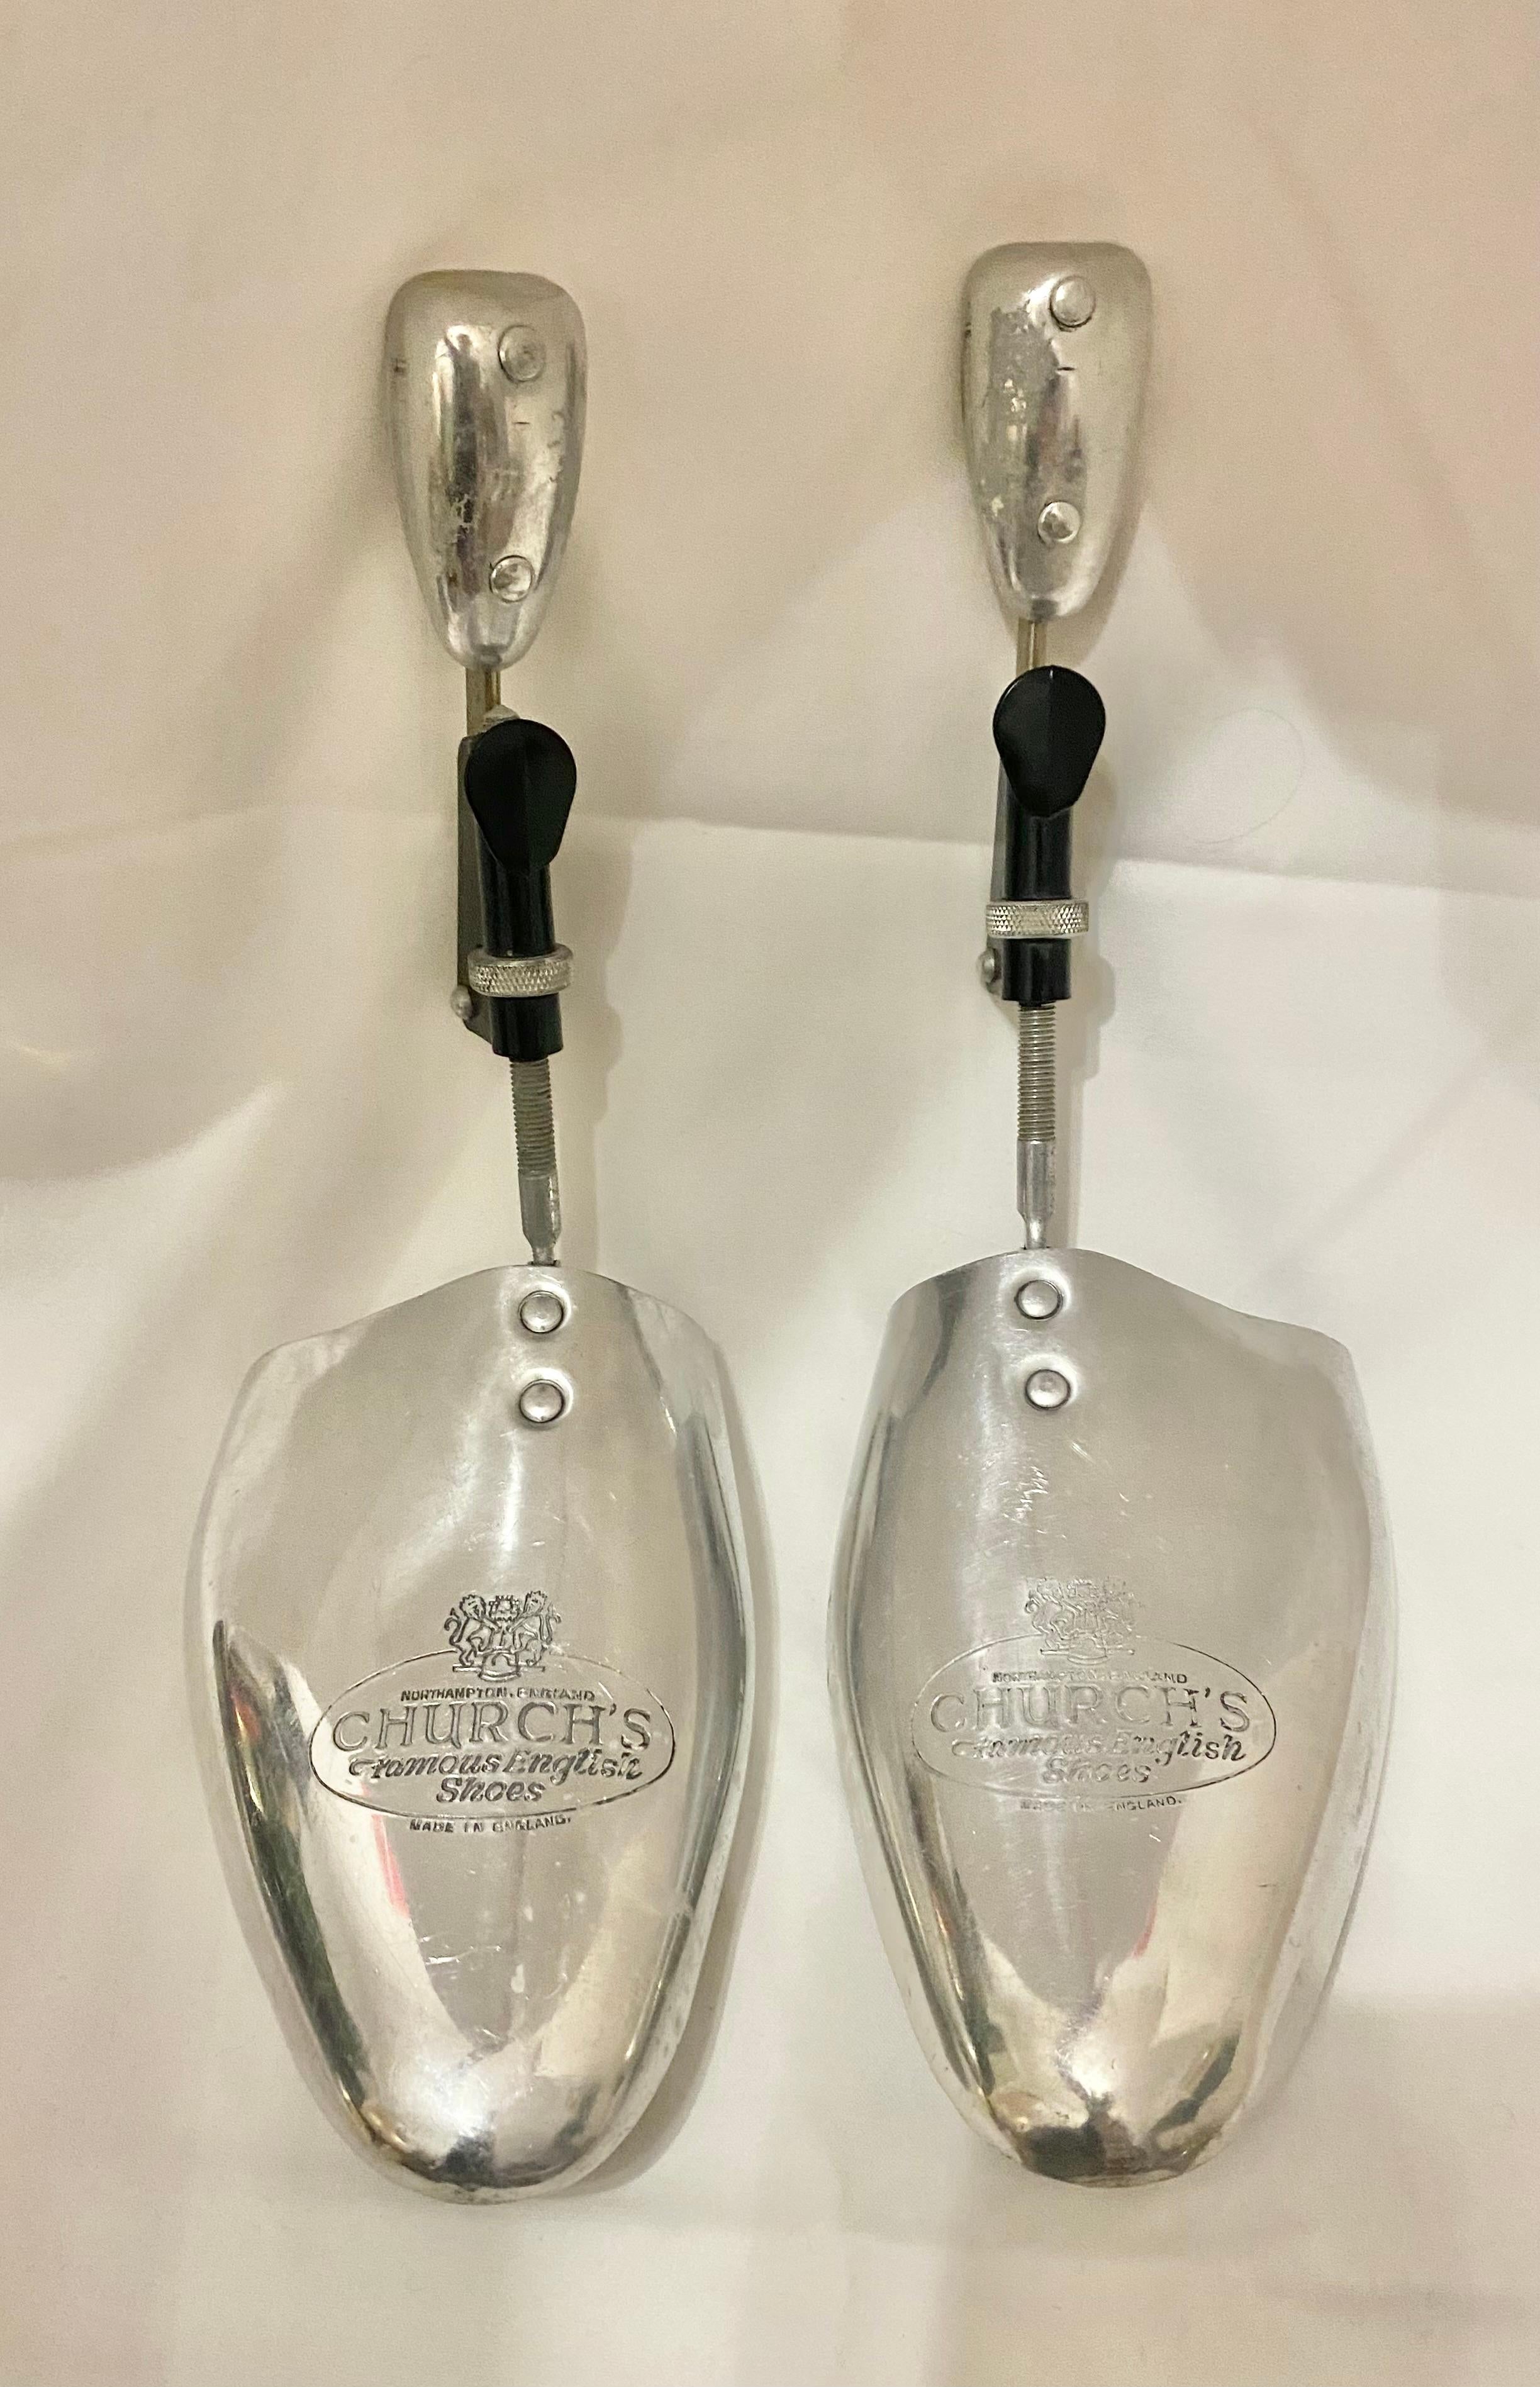 Mid-Century Church's Silver Tone Shoe Tree Stretchers, shiny silver tone metal, engraved front logo, manual adjustable length

Condition: English Mid-Century, it shows slight sign of wear, however still shining and well-functioning

Size: 9.5 - 11